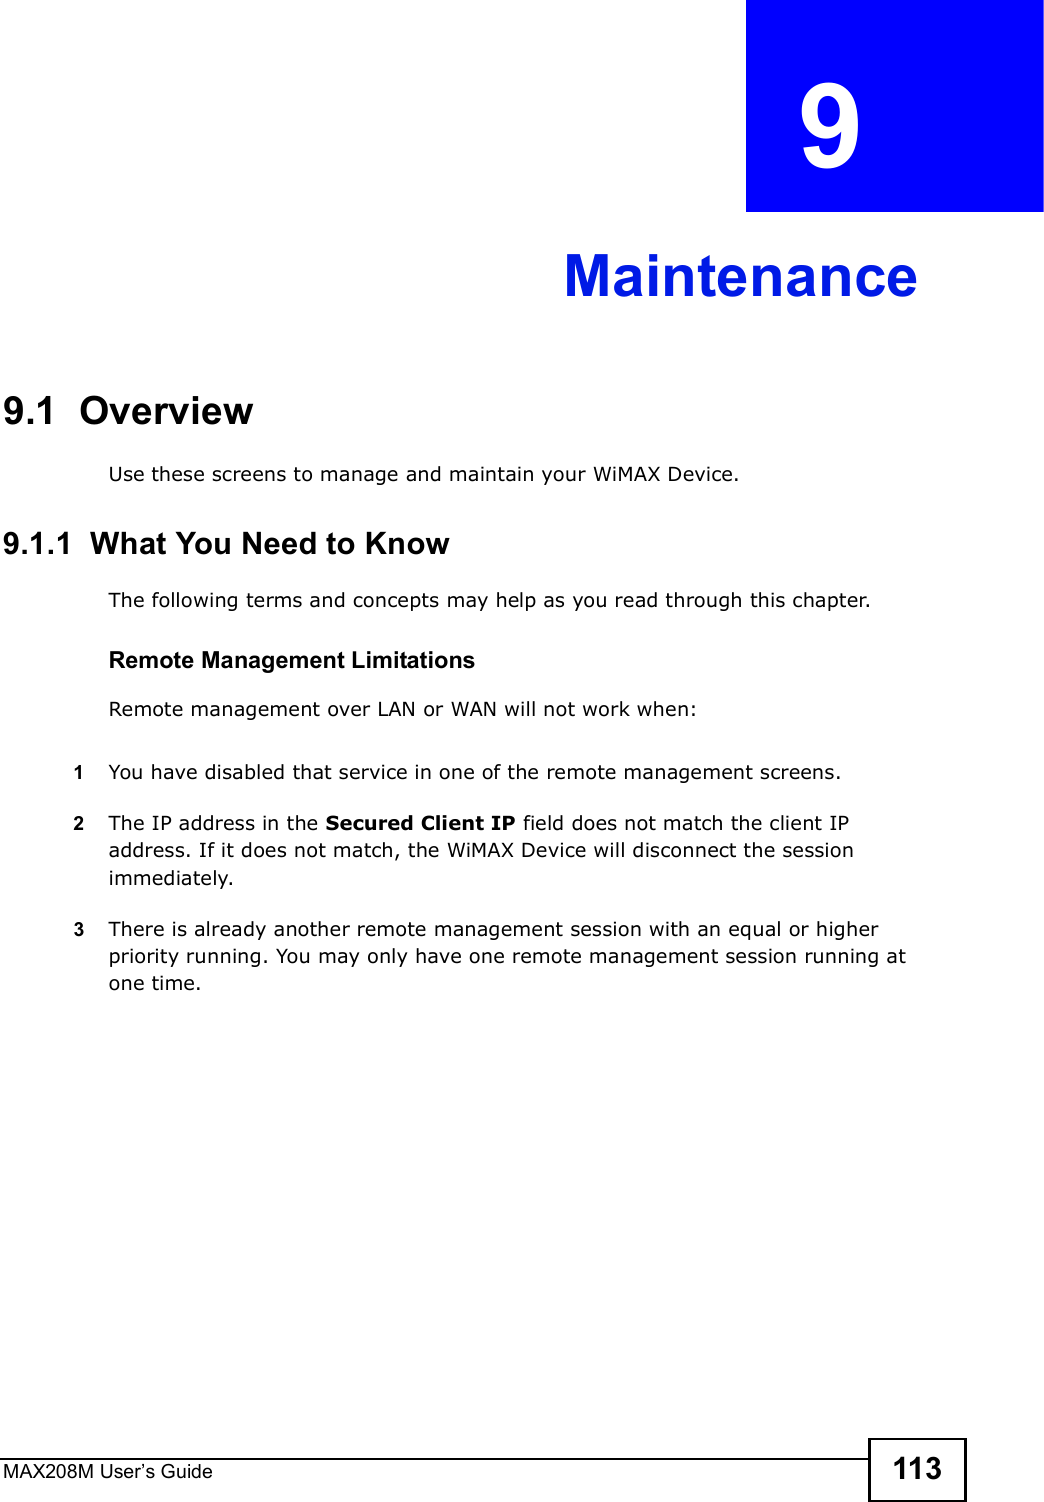 MAX208M User s Guide 113CHAPTER  9 Maintenance9.1  OverviewUse these screens to manage and maintain your WiMAX Device.9.1.1  What You Need to KnowThe following terms and concepts may help as you read through this chapter.Remote Management LimitationsRemote management over LAN or WAN will not work when:1You have disabled that service in one of the remote management screens.2The IP address in the Secured Client IP field does not match the client IP address. If it does not match, the WiMAX Device will disconnect the session immediately.3There is already another remote management session with an equal or higher priority running. You may only have one remote management session running at one time.